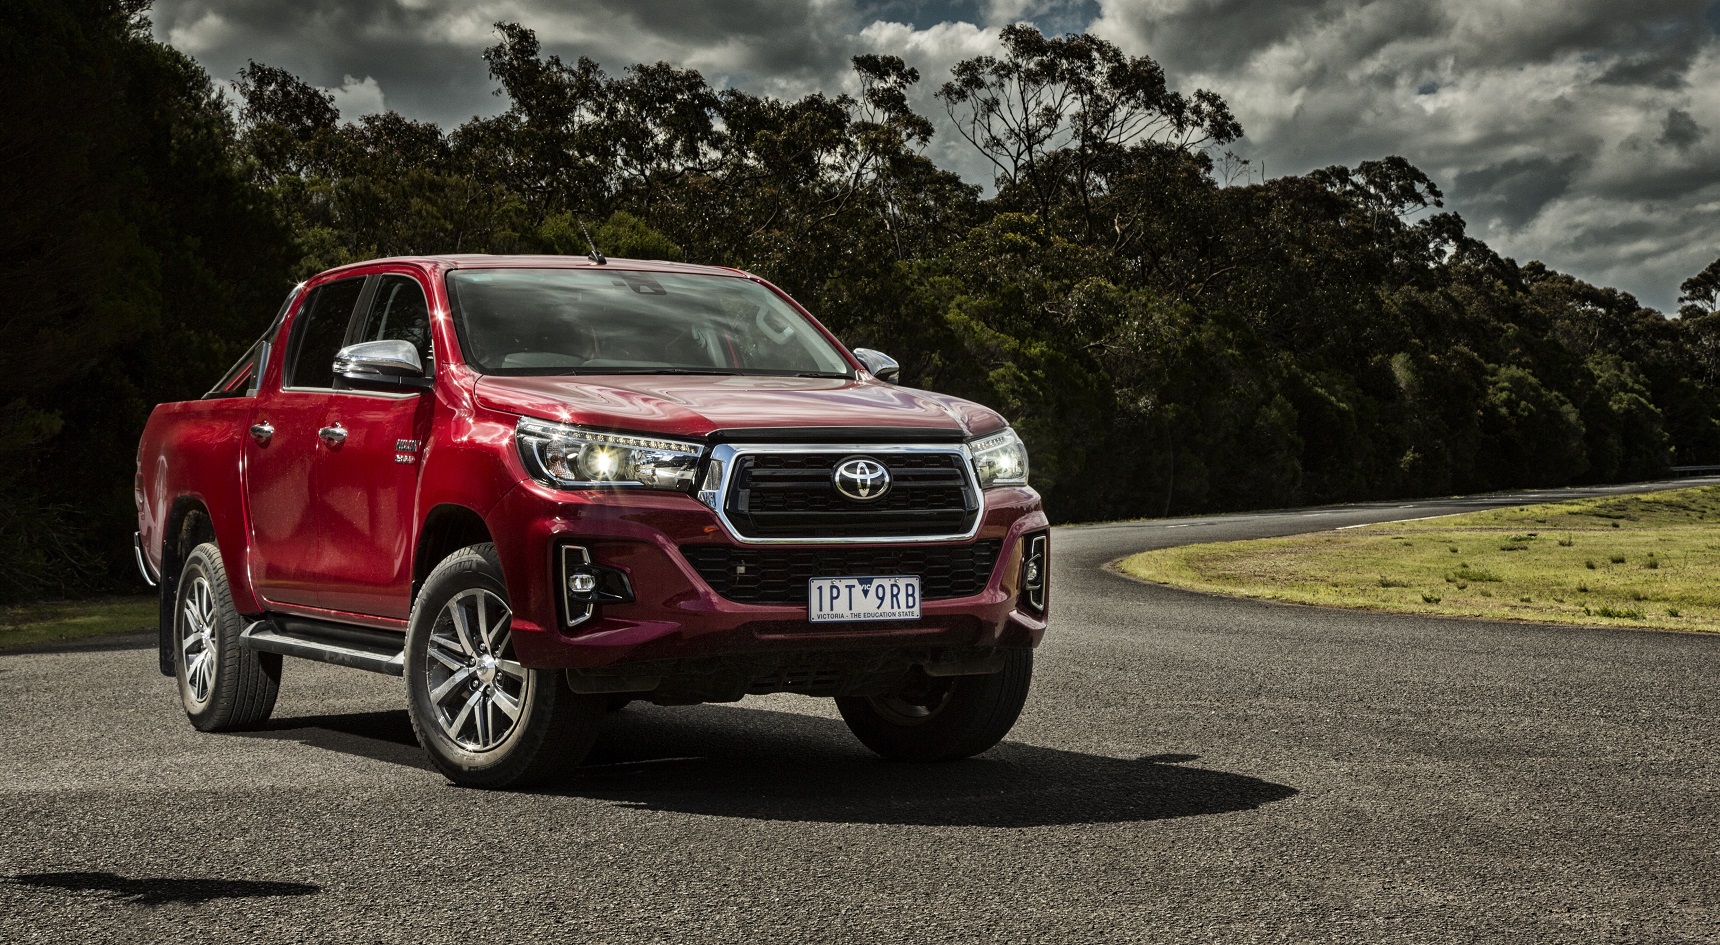 The HiLux trumps its rivals for safety, carrying a five-star ANCAP crash rating.